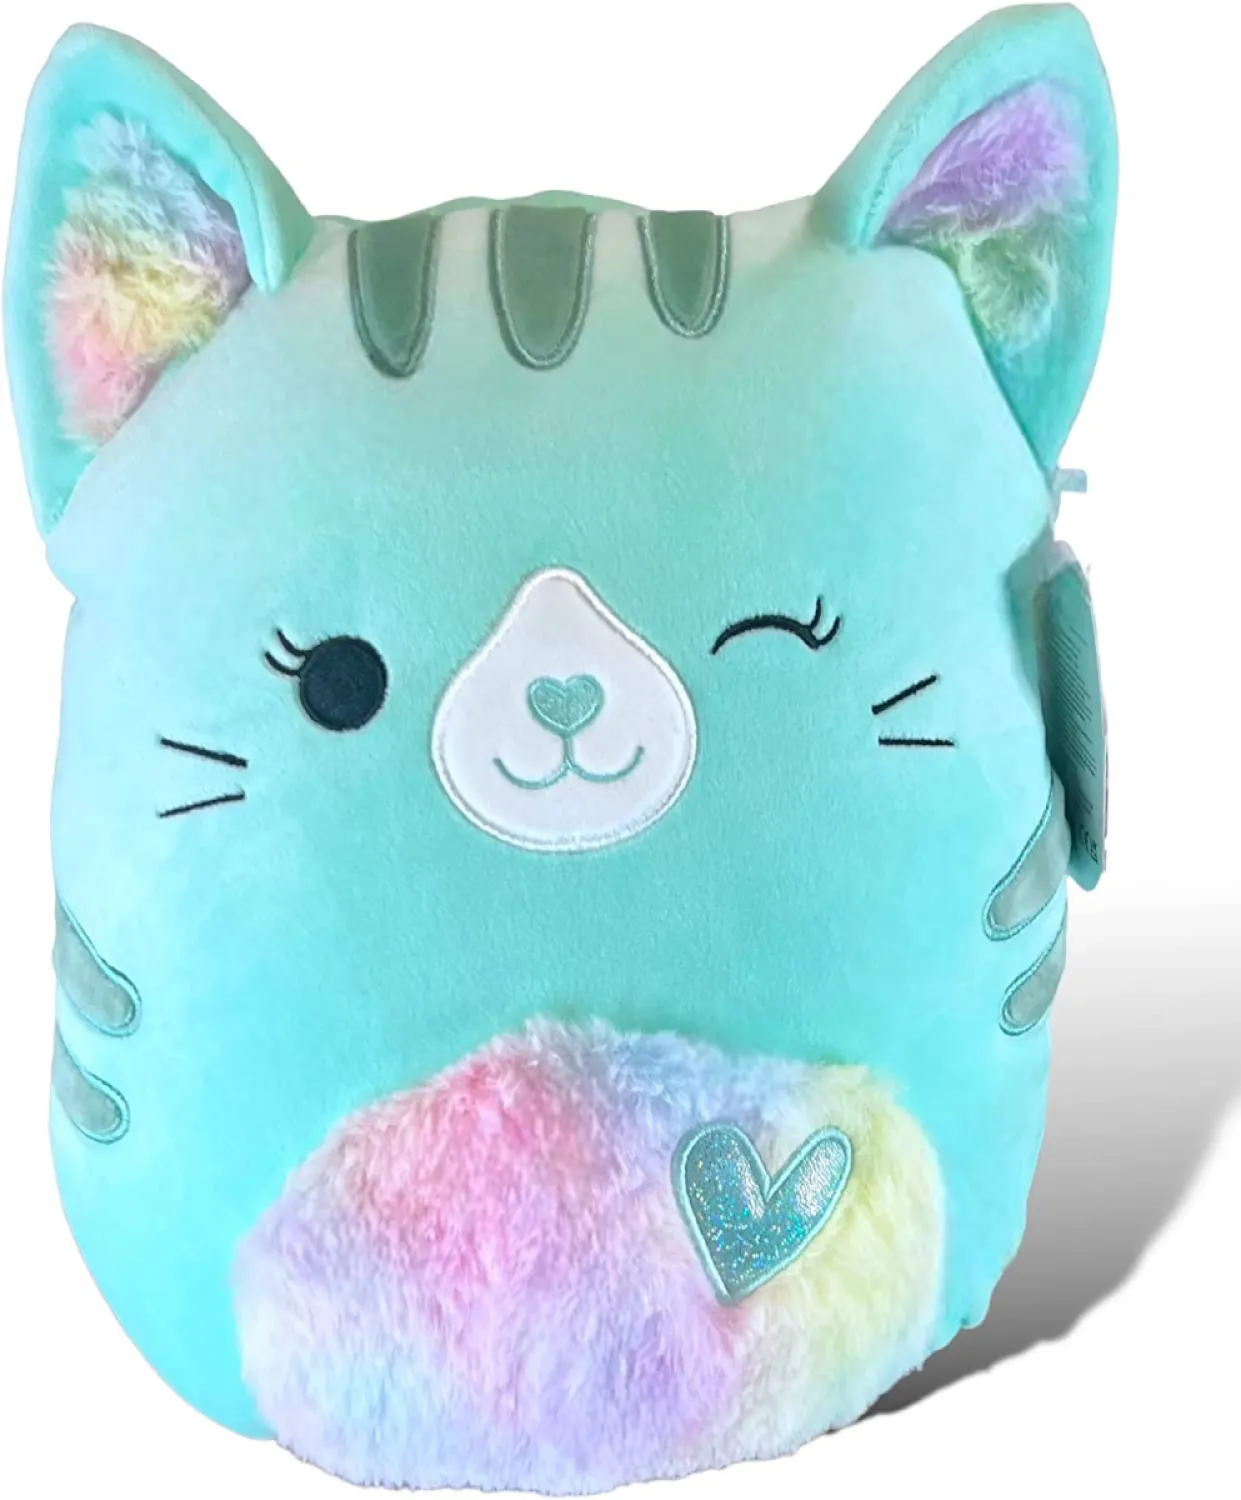 A teal tabby cat squishmallow with a rainbow stomach and a winking face. There's a heart on her stomach.